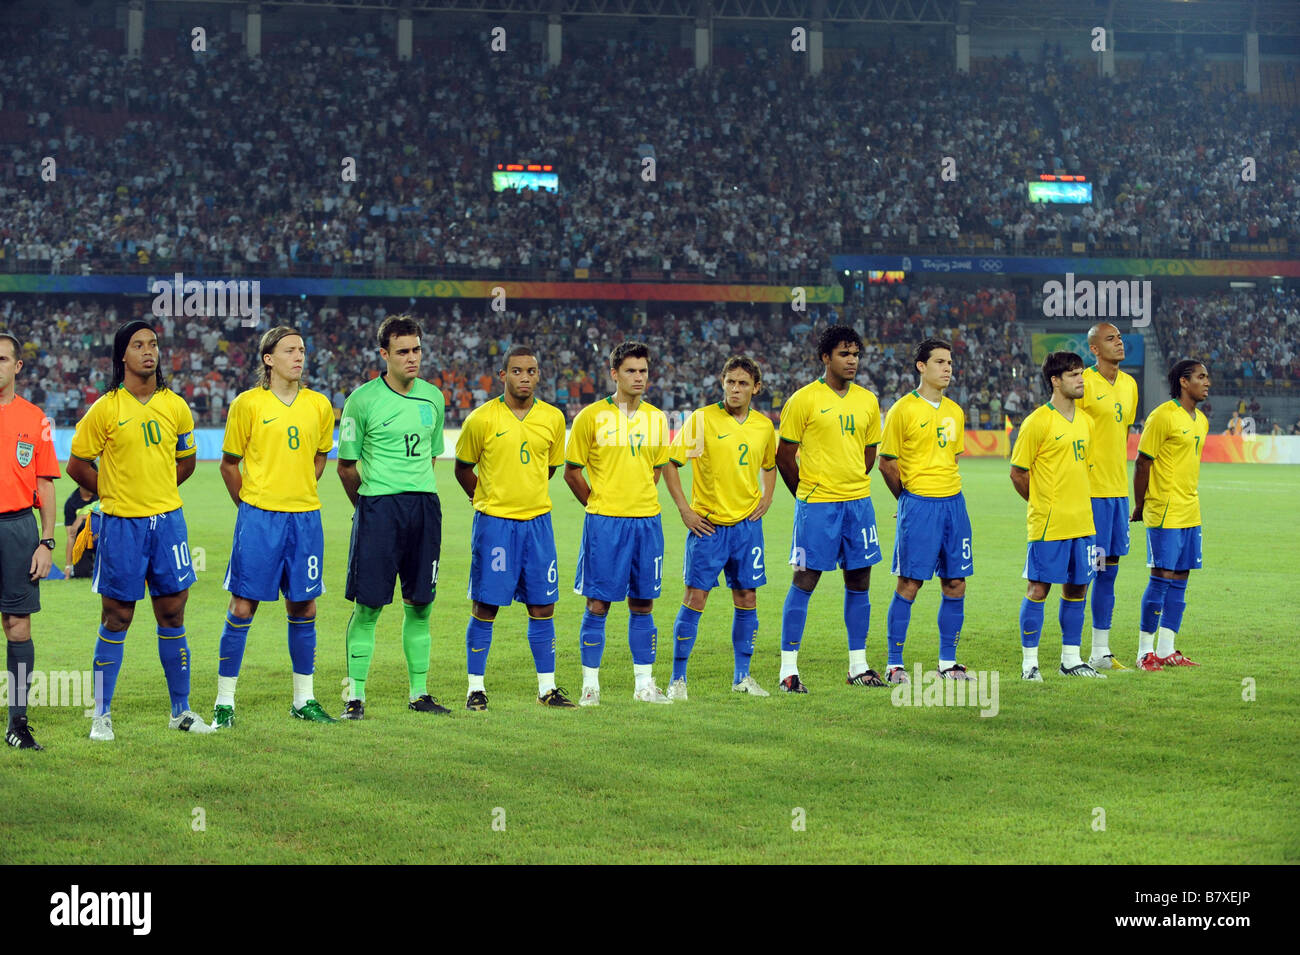 Brazil team group line up BRA AUGUST 19 2008 Football Beijing 2008 Olympic Games Mens Football semi final match between Argentina and Brazil at Workers Stadium in Beijing China Photo by Atsushi Tomura AFLO SPORT 1035 Stock Photo